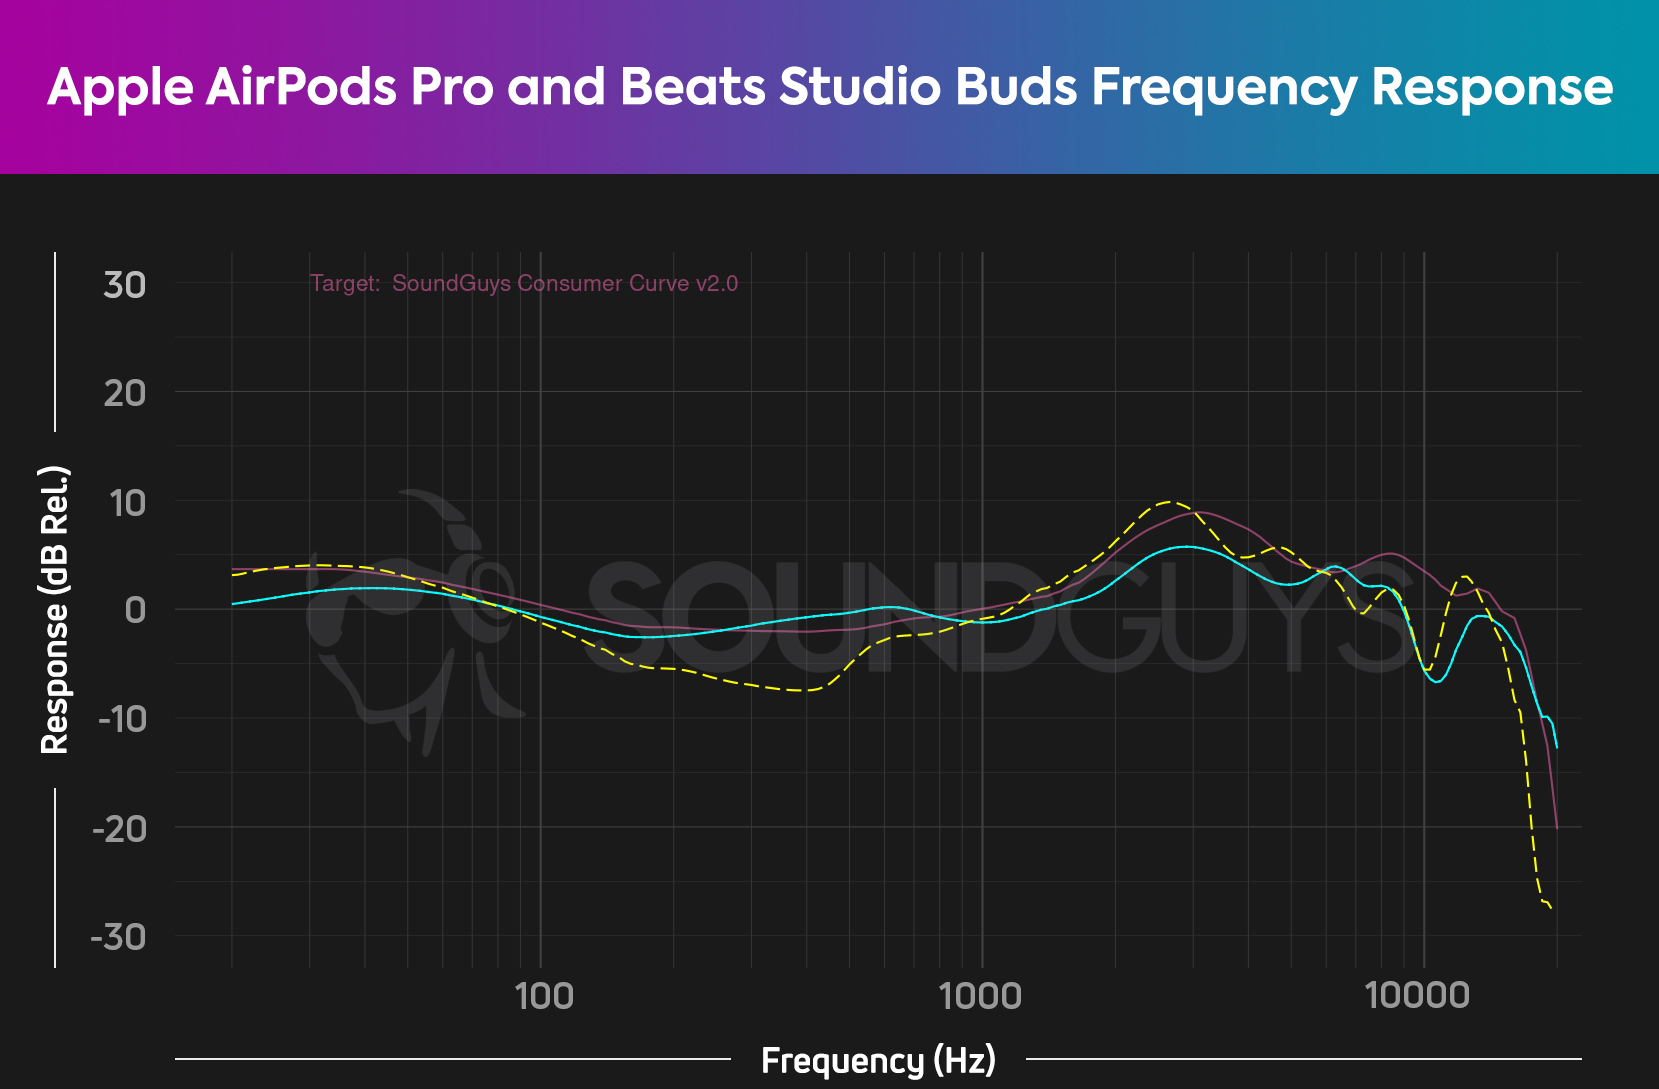 Frequency chart comparing the Beats Studio Buds and Apple AirPods Pro